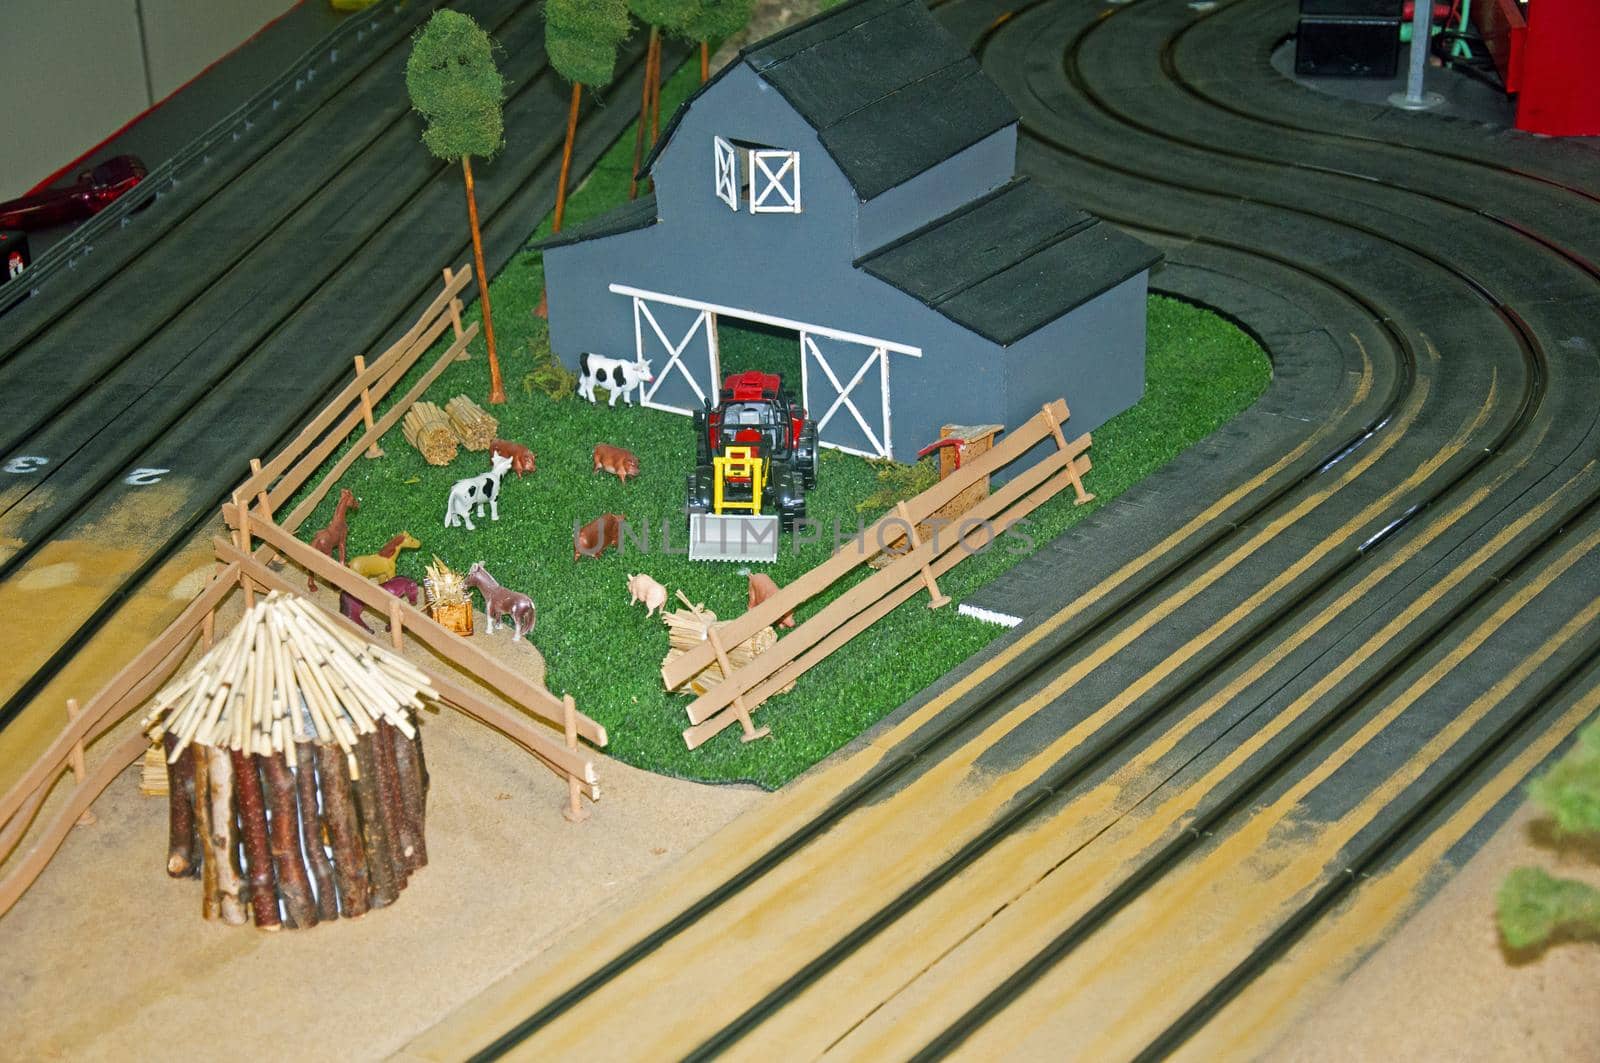 Small grey toy housestock, red tractor and wooden barn, right up view